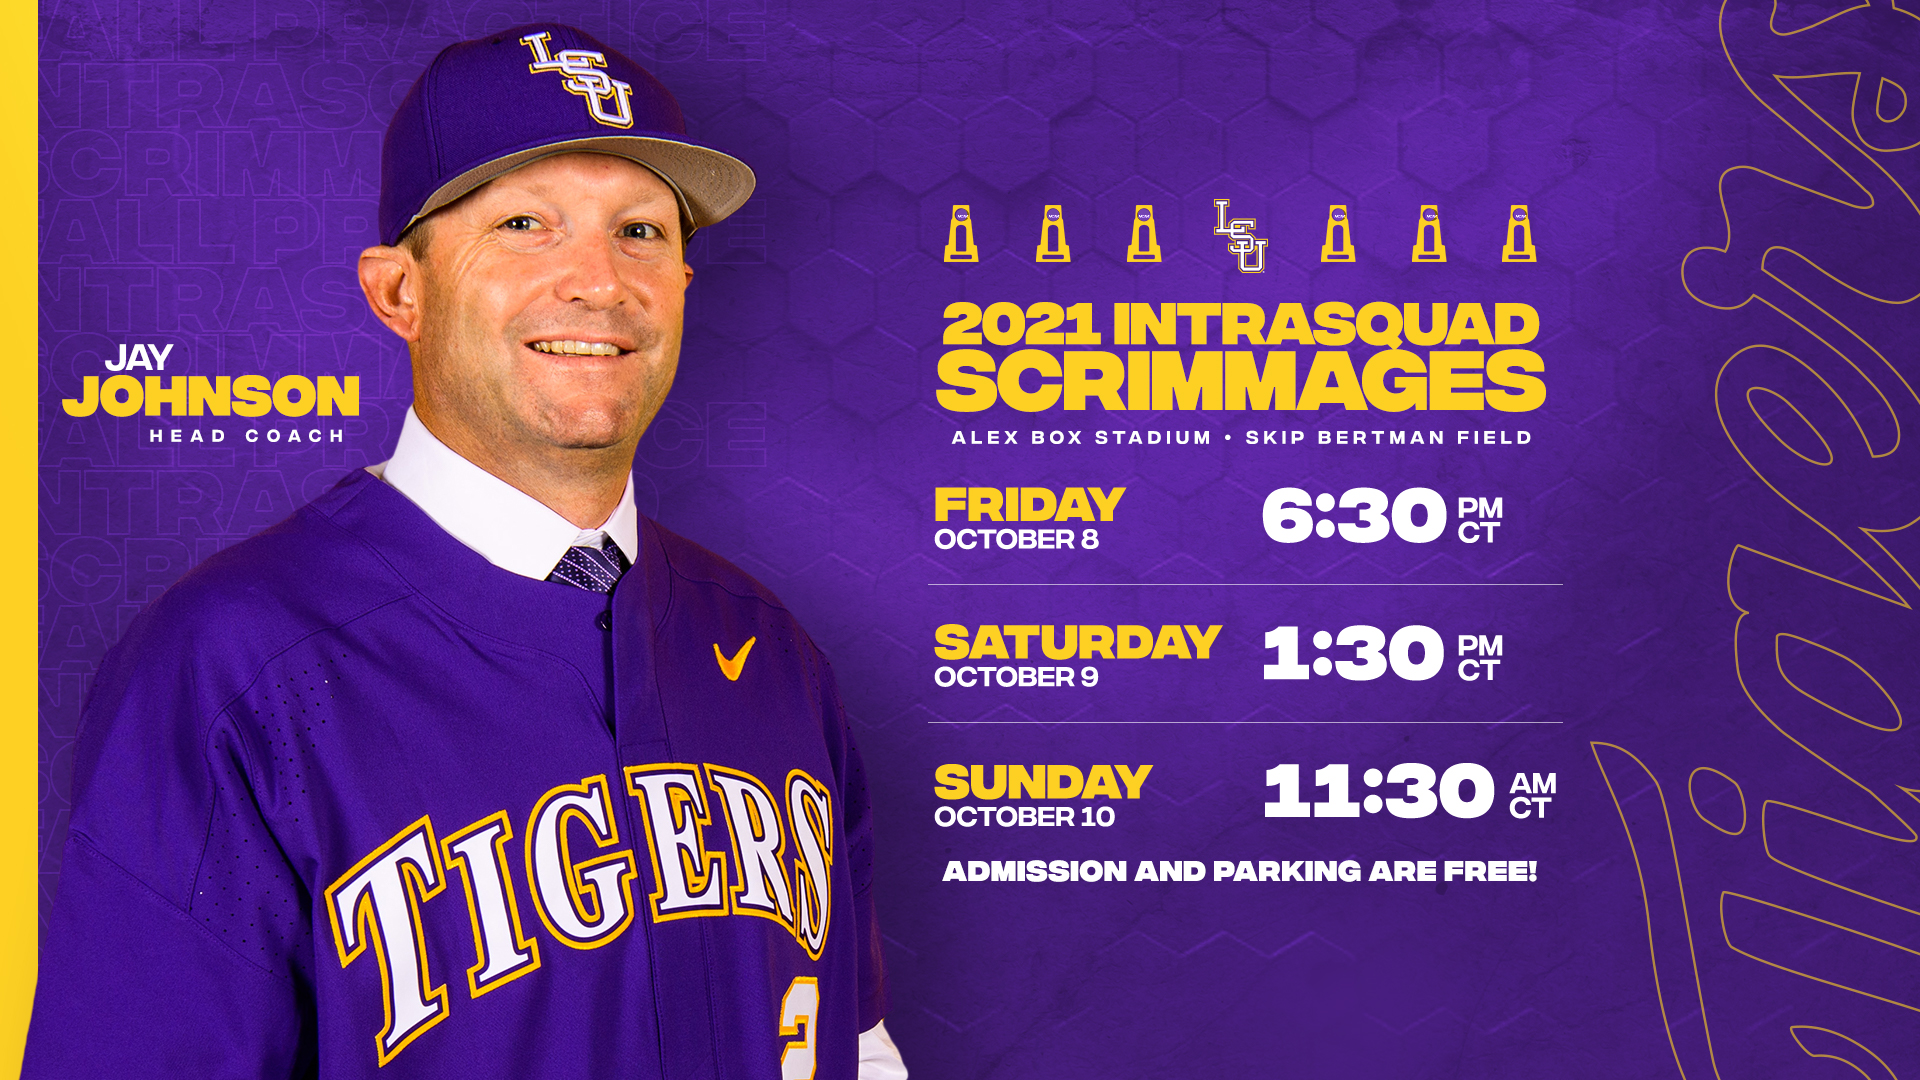 Lsu 2022 Baseball Schedule Lsu Baseball On Twitter: "Get Your First Look At The 2022 Tigers This  Weekend At "The Box!" #Geauxtigers 🔗Https://T.co/E2Icxttd2J  Https://T.co/X1Hwe84Q7S" / Twitter